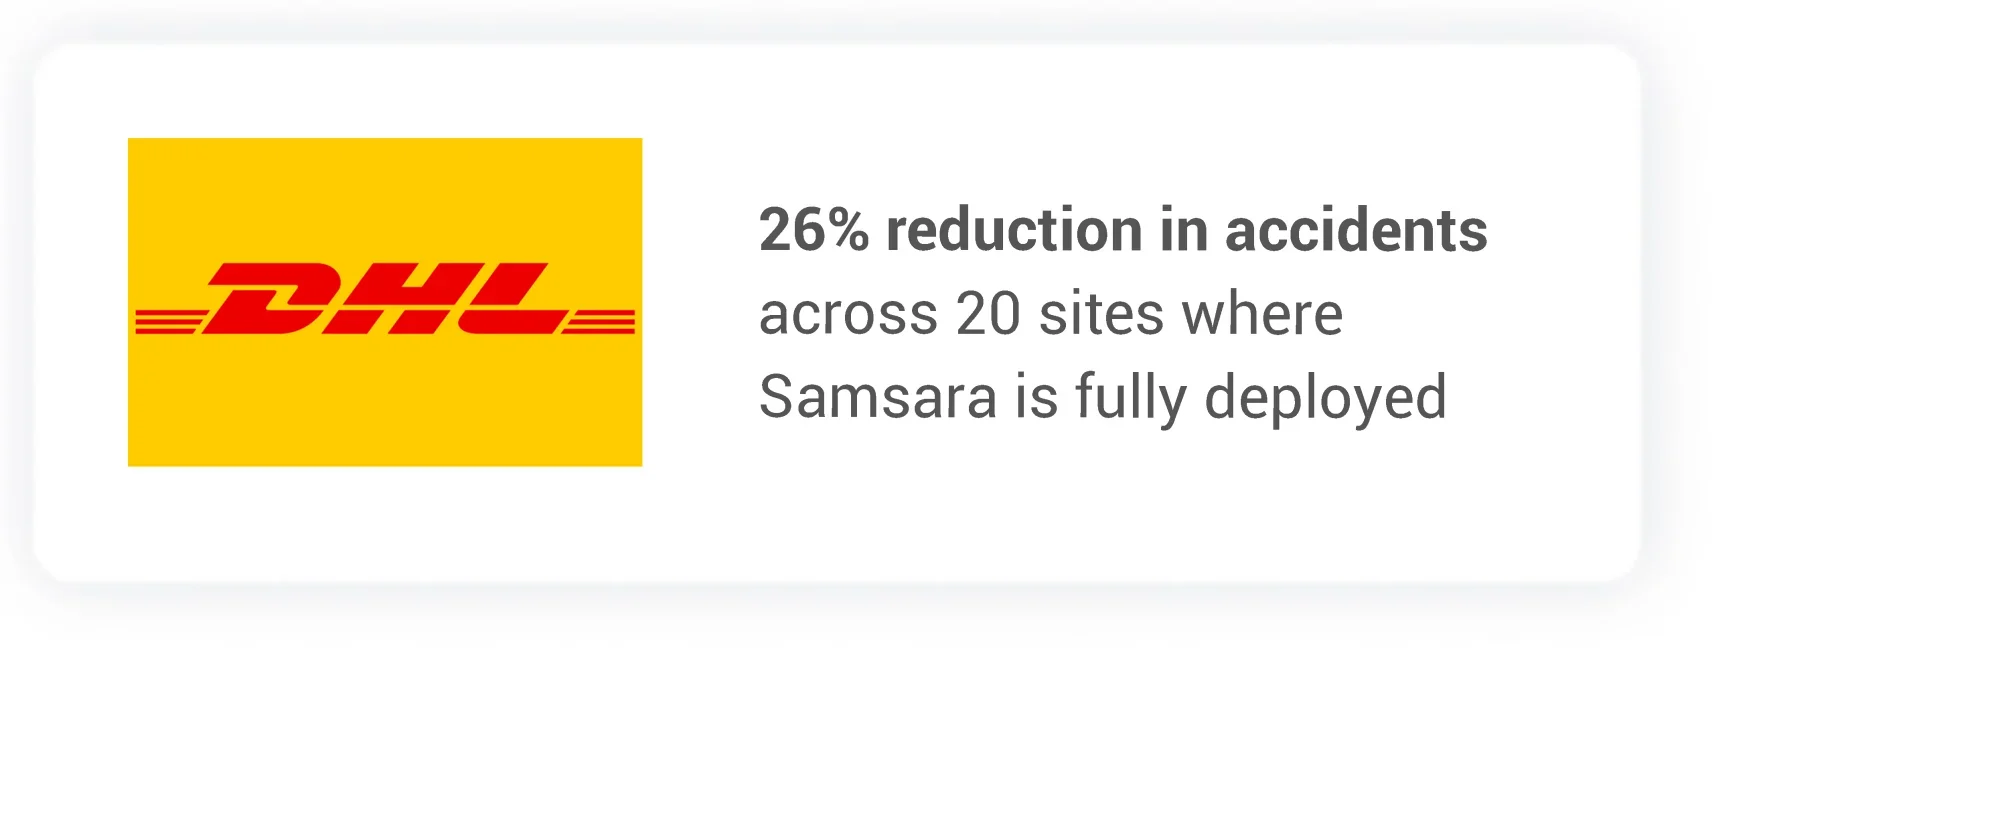 Reduced accidents by 26% across 20 locations where Samsara is fully deployed.